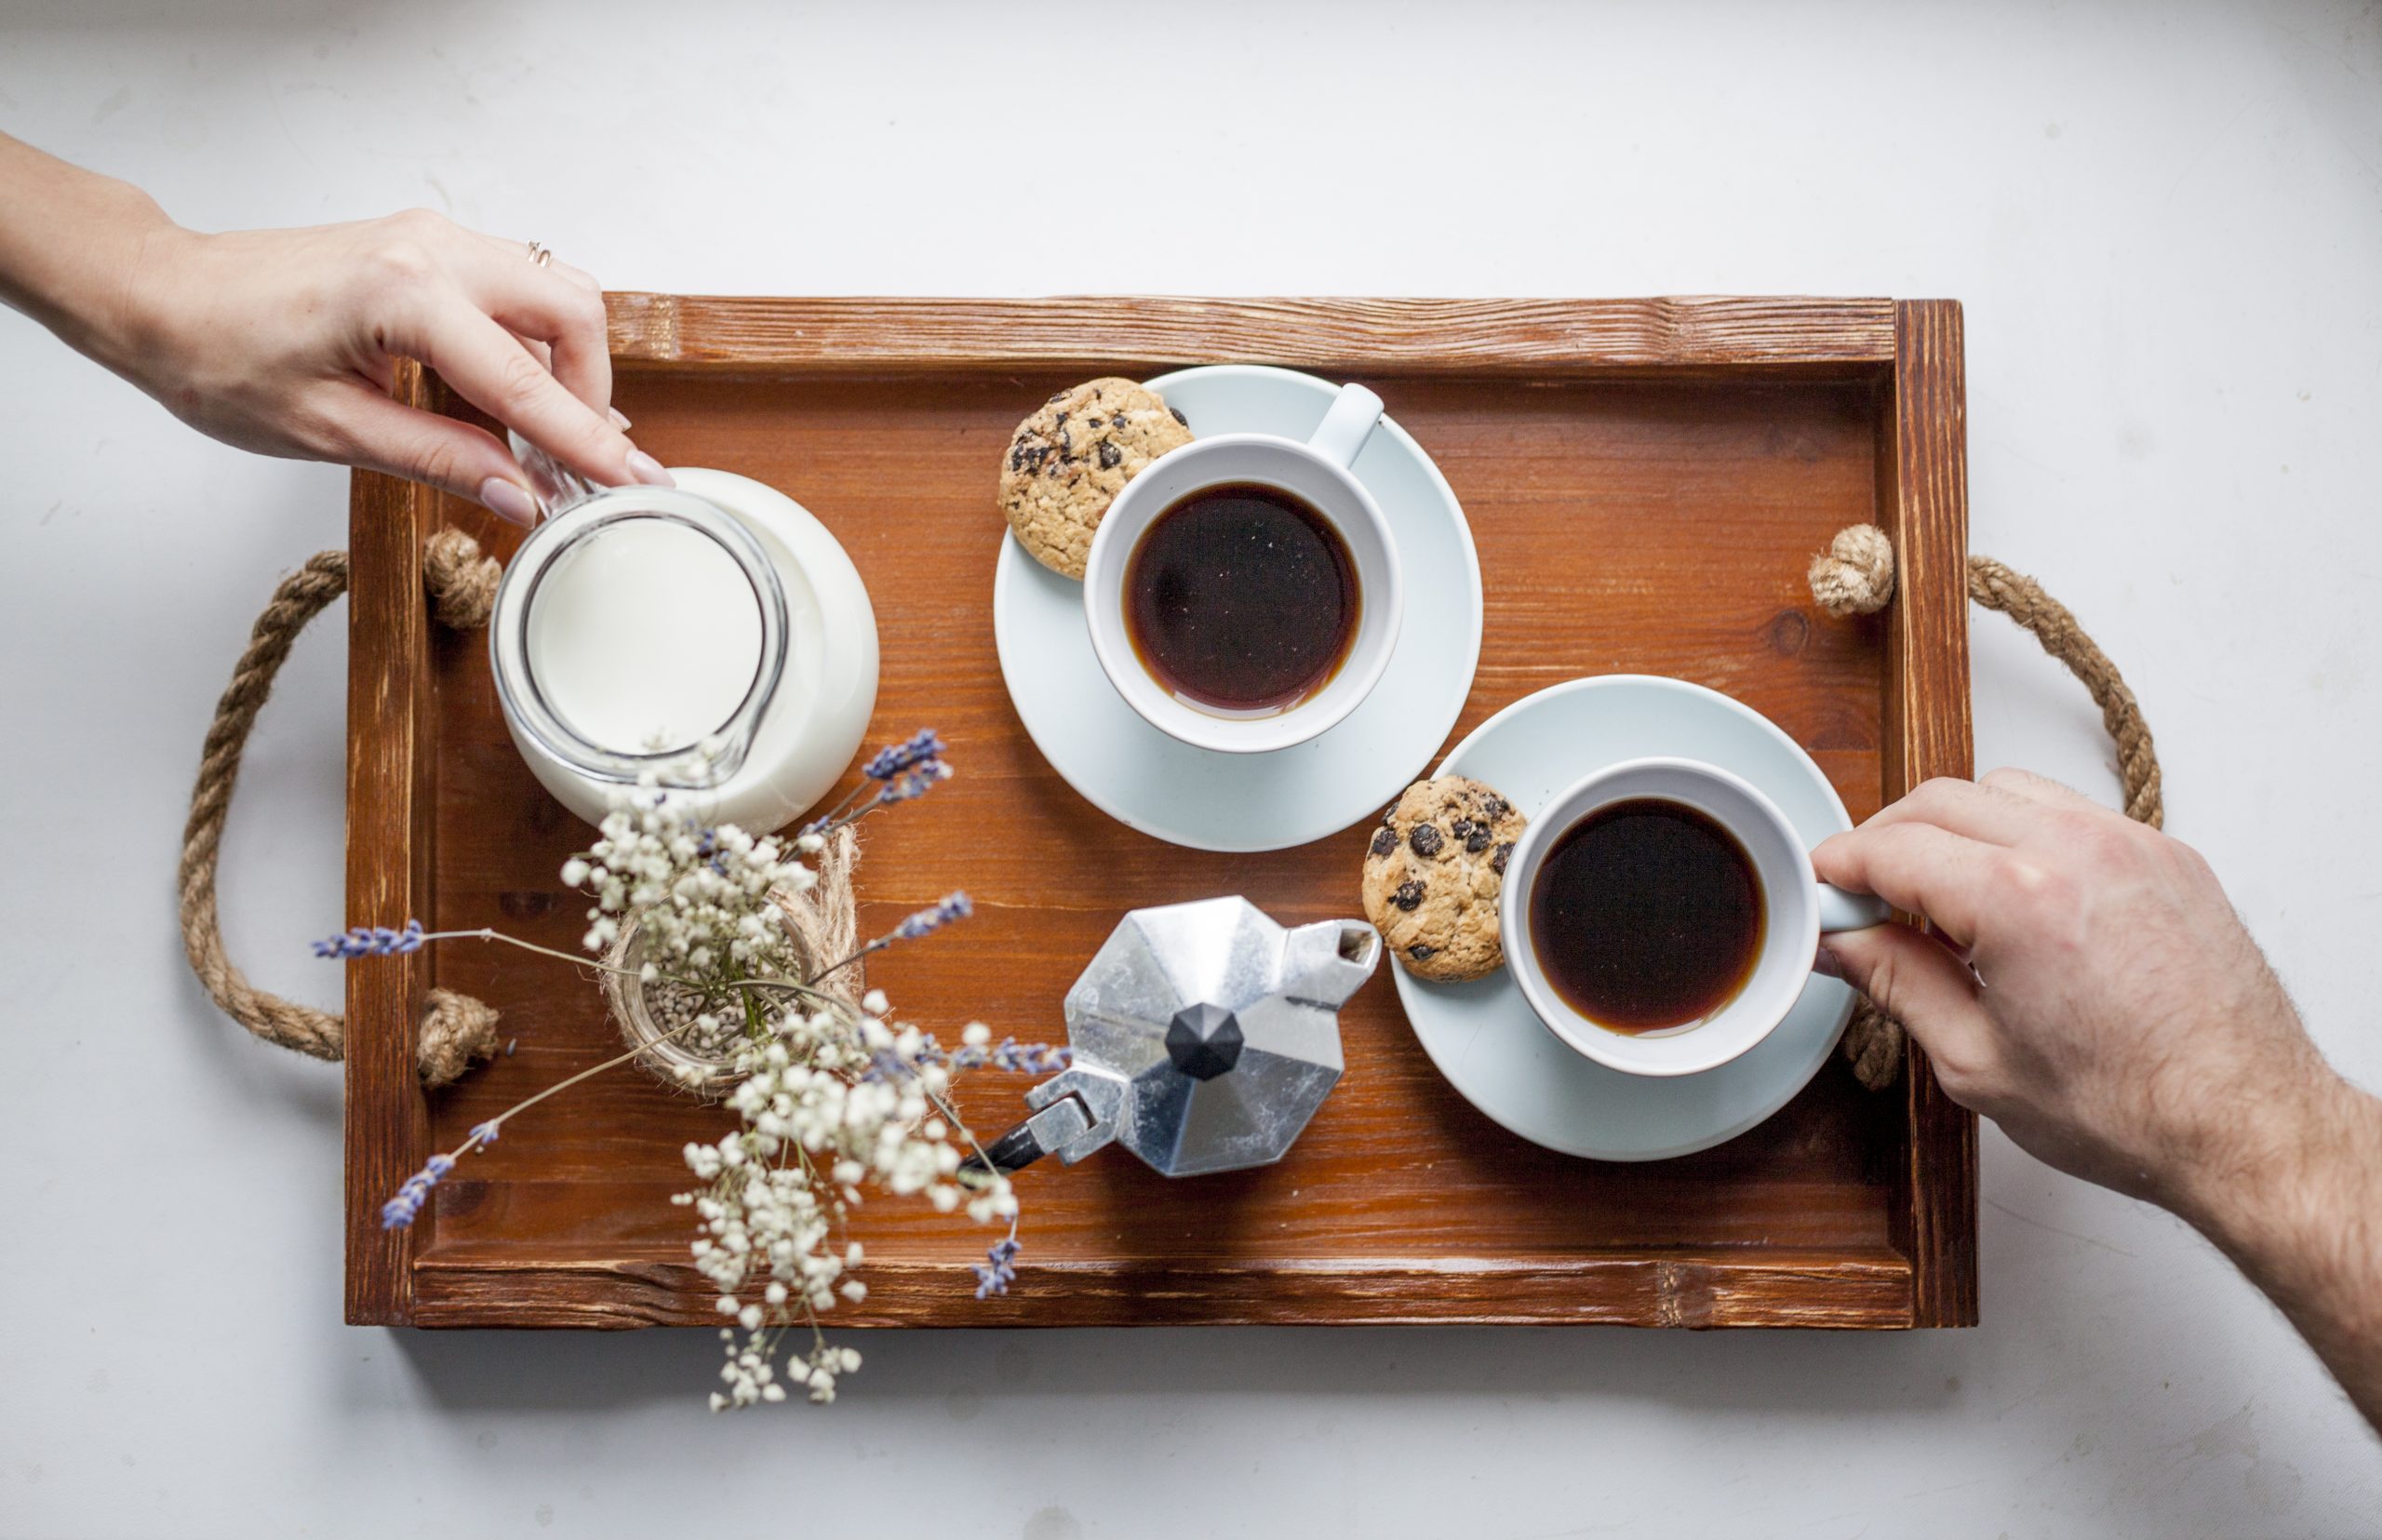 Intake some caffeine by consuming tea and coffee for immediate menses